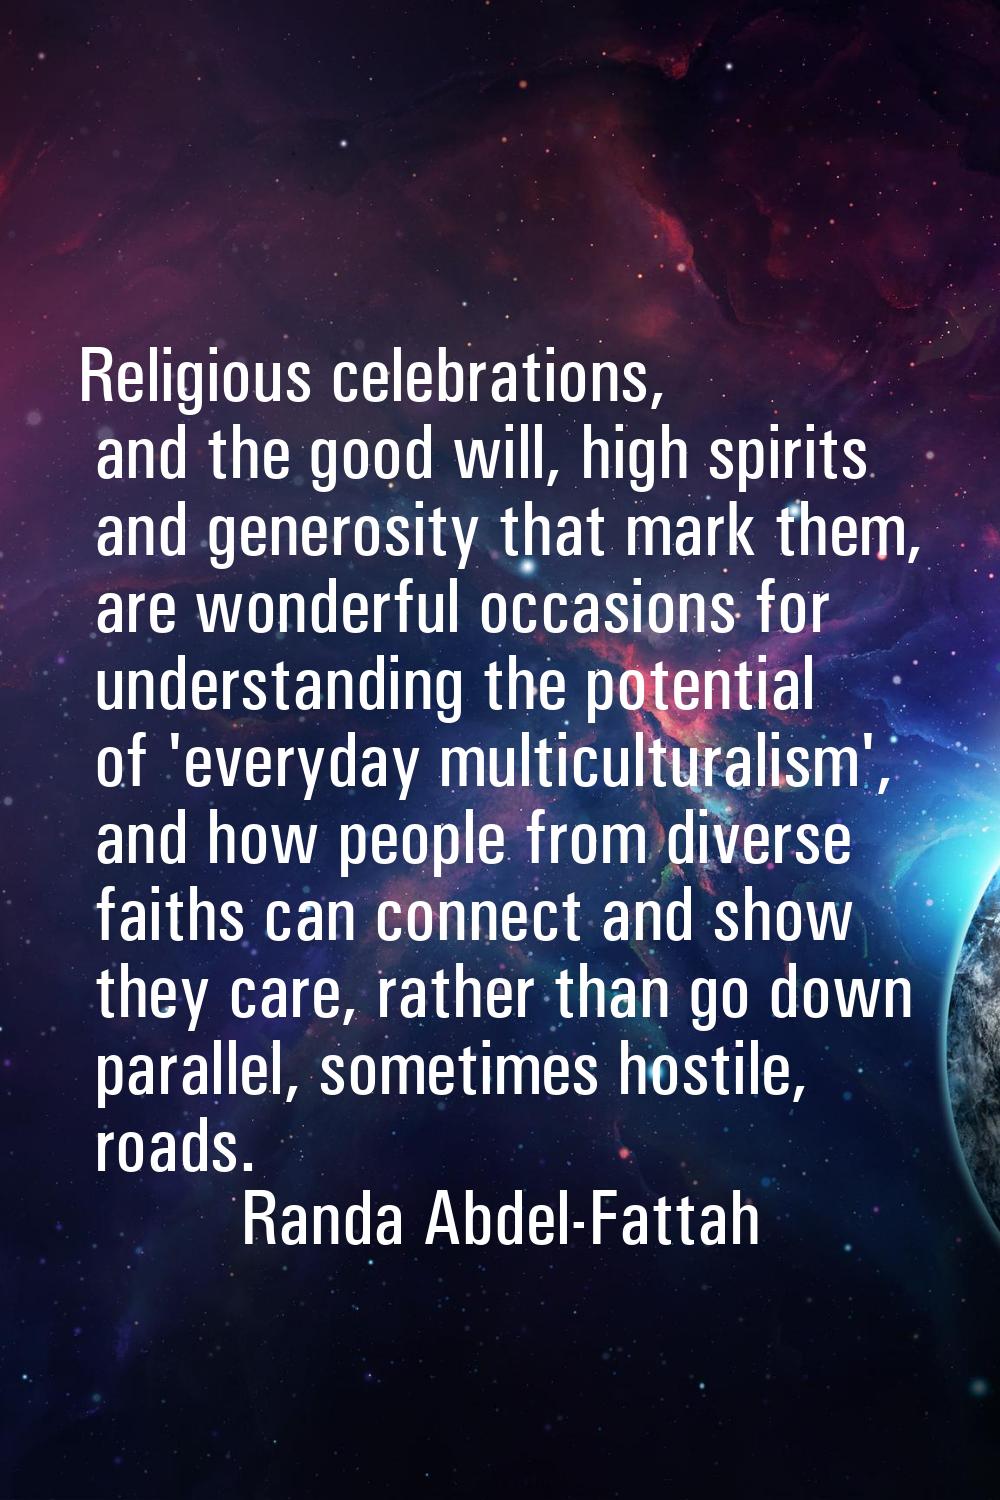 Religious celebrations, and the good will, high spirits and generosity that mark them, are wonderfu